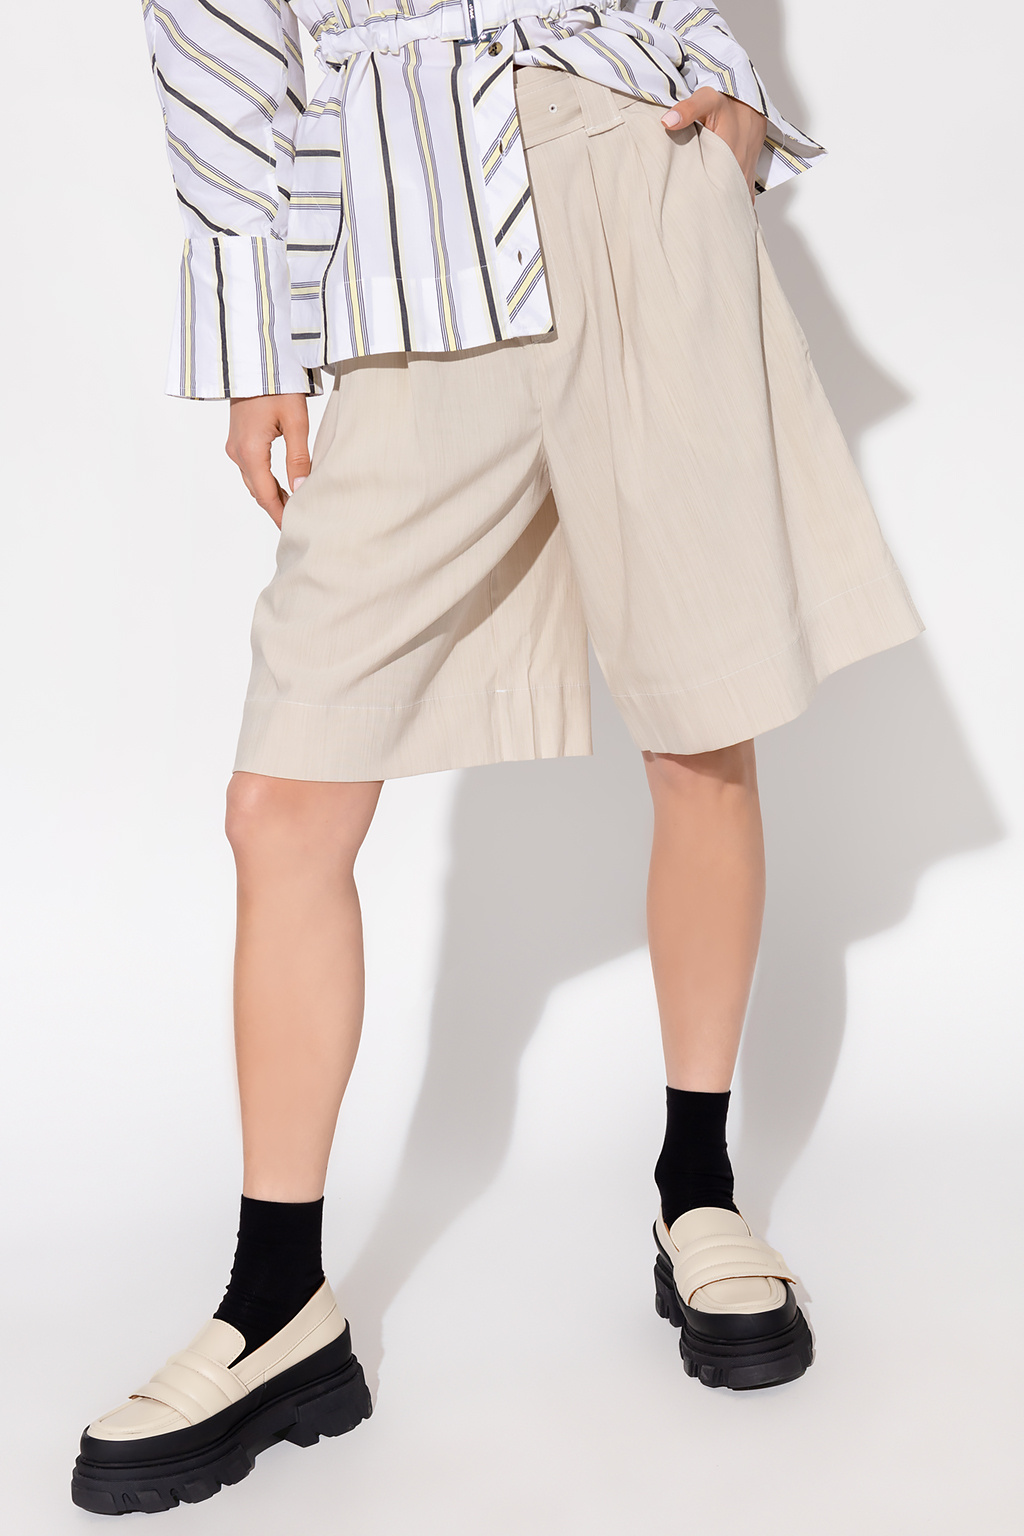 Ganni Dress from the x Jacquemus Collection